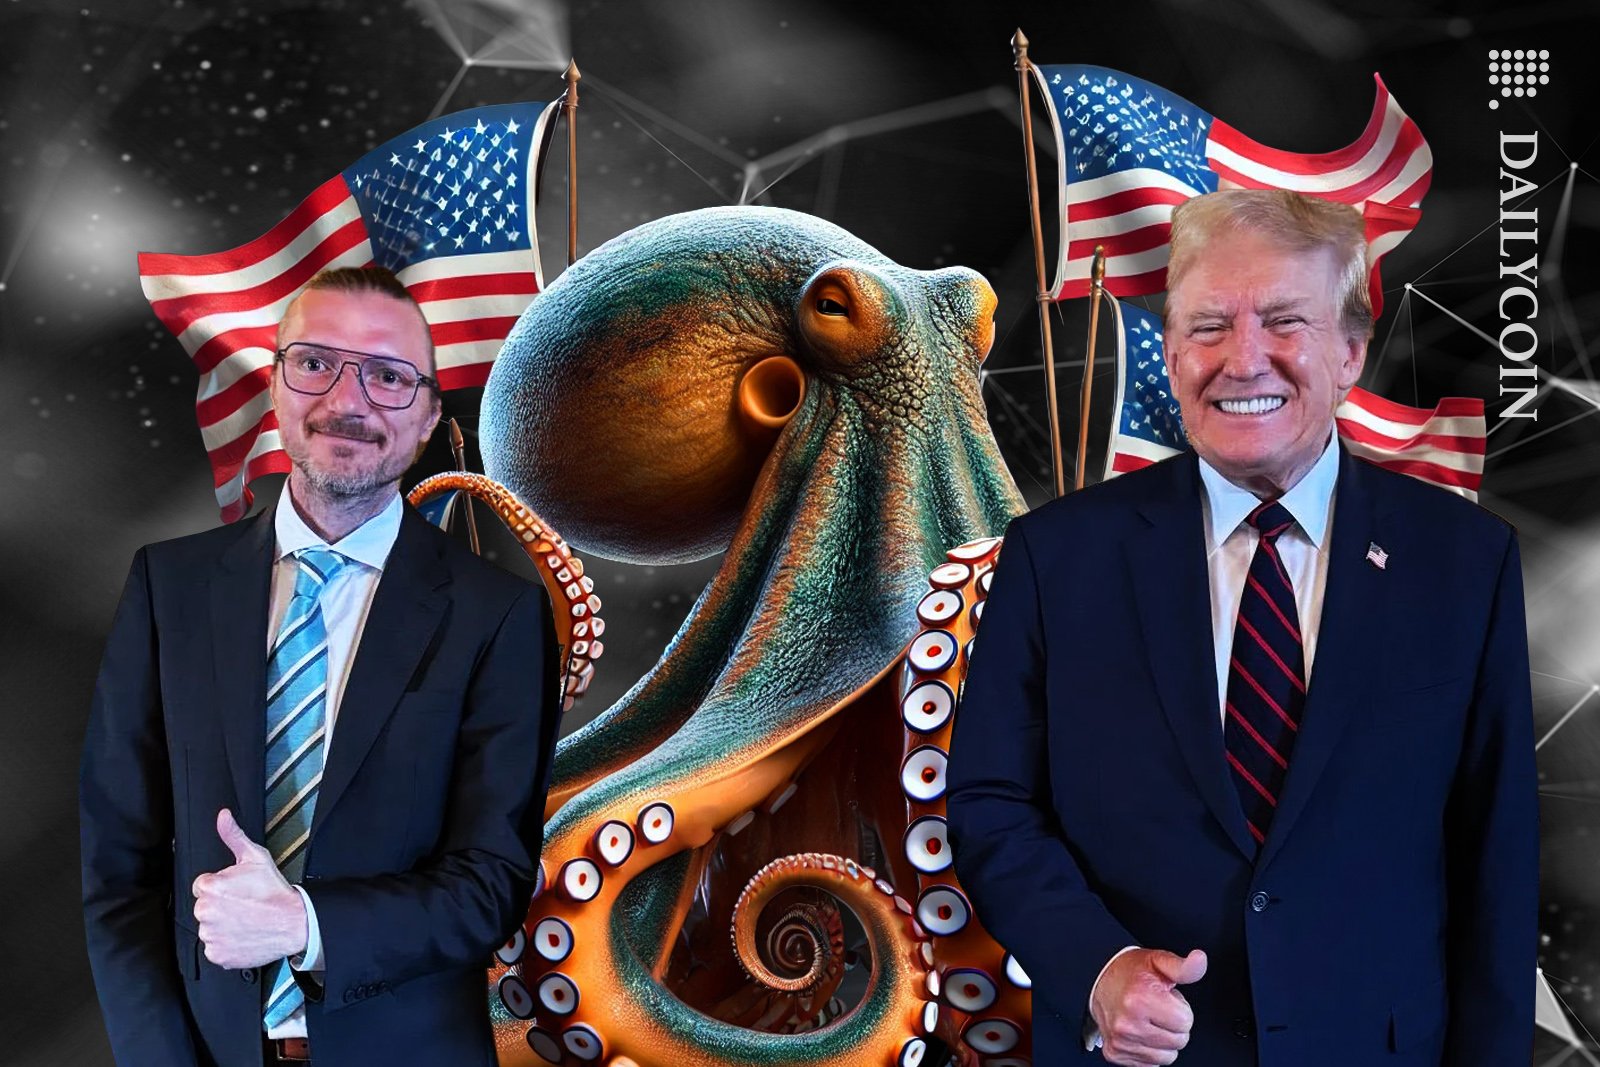 Donald Trump with Kraken and its founder Jesse Powell showing thumbs up.